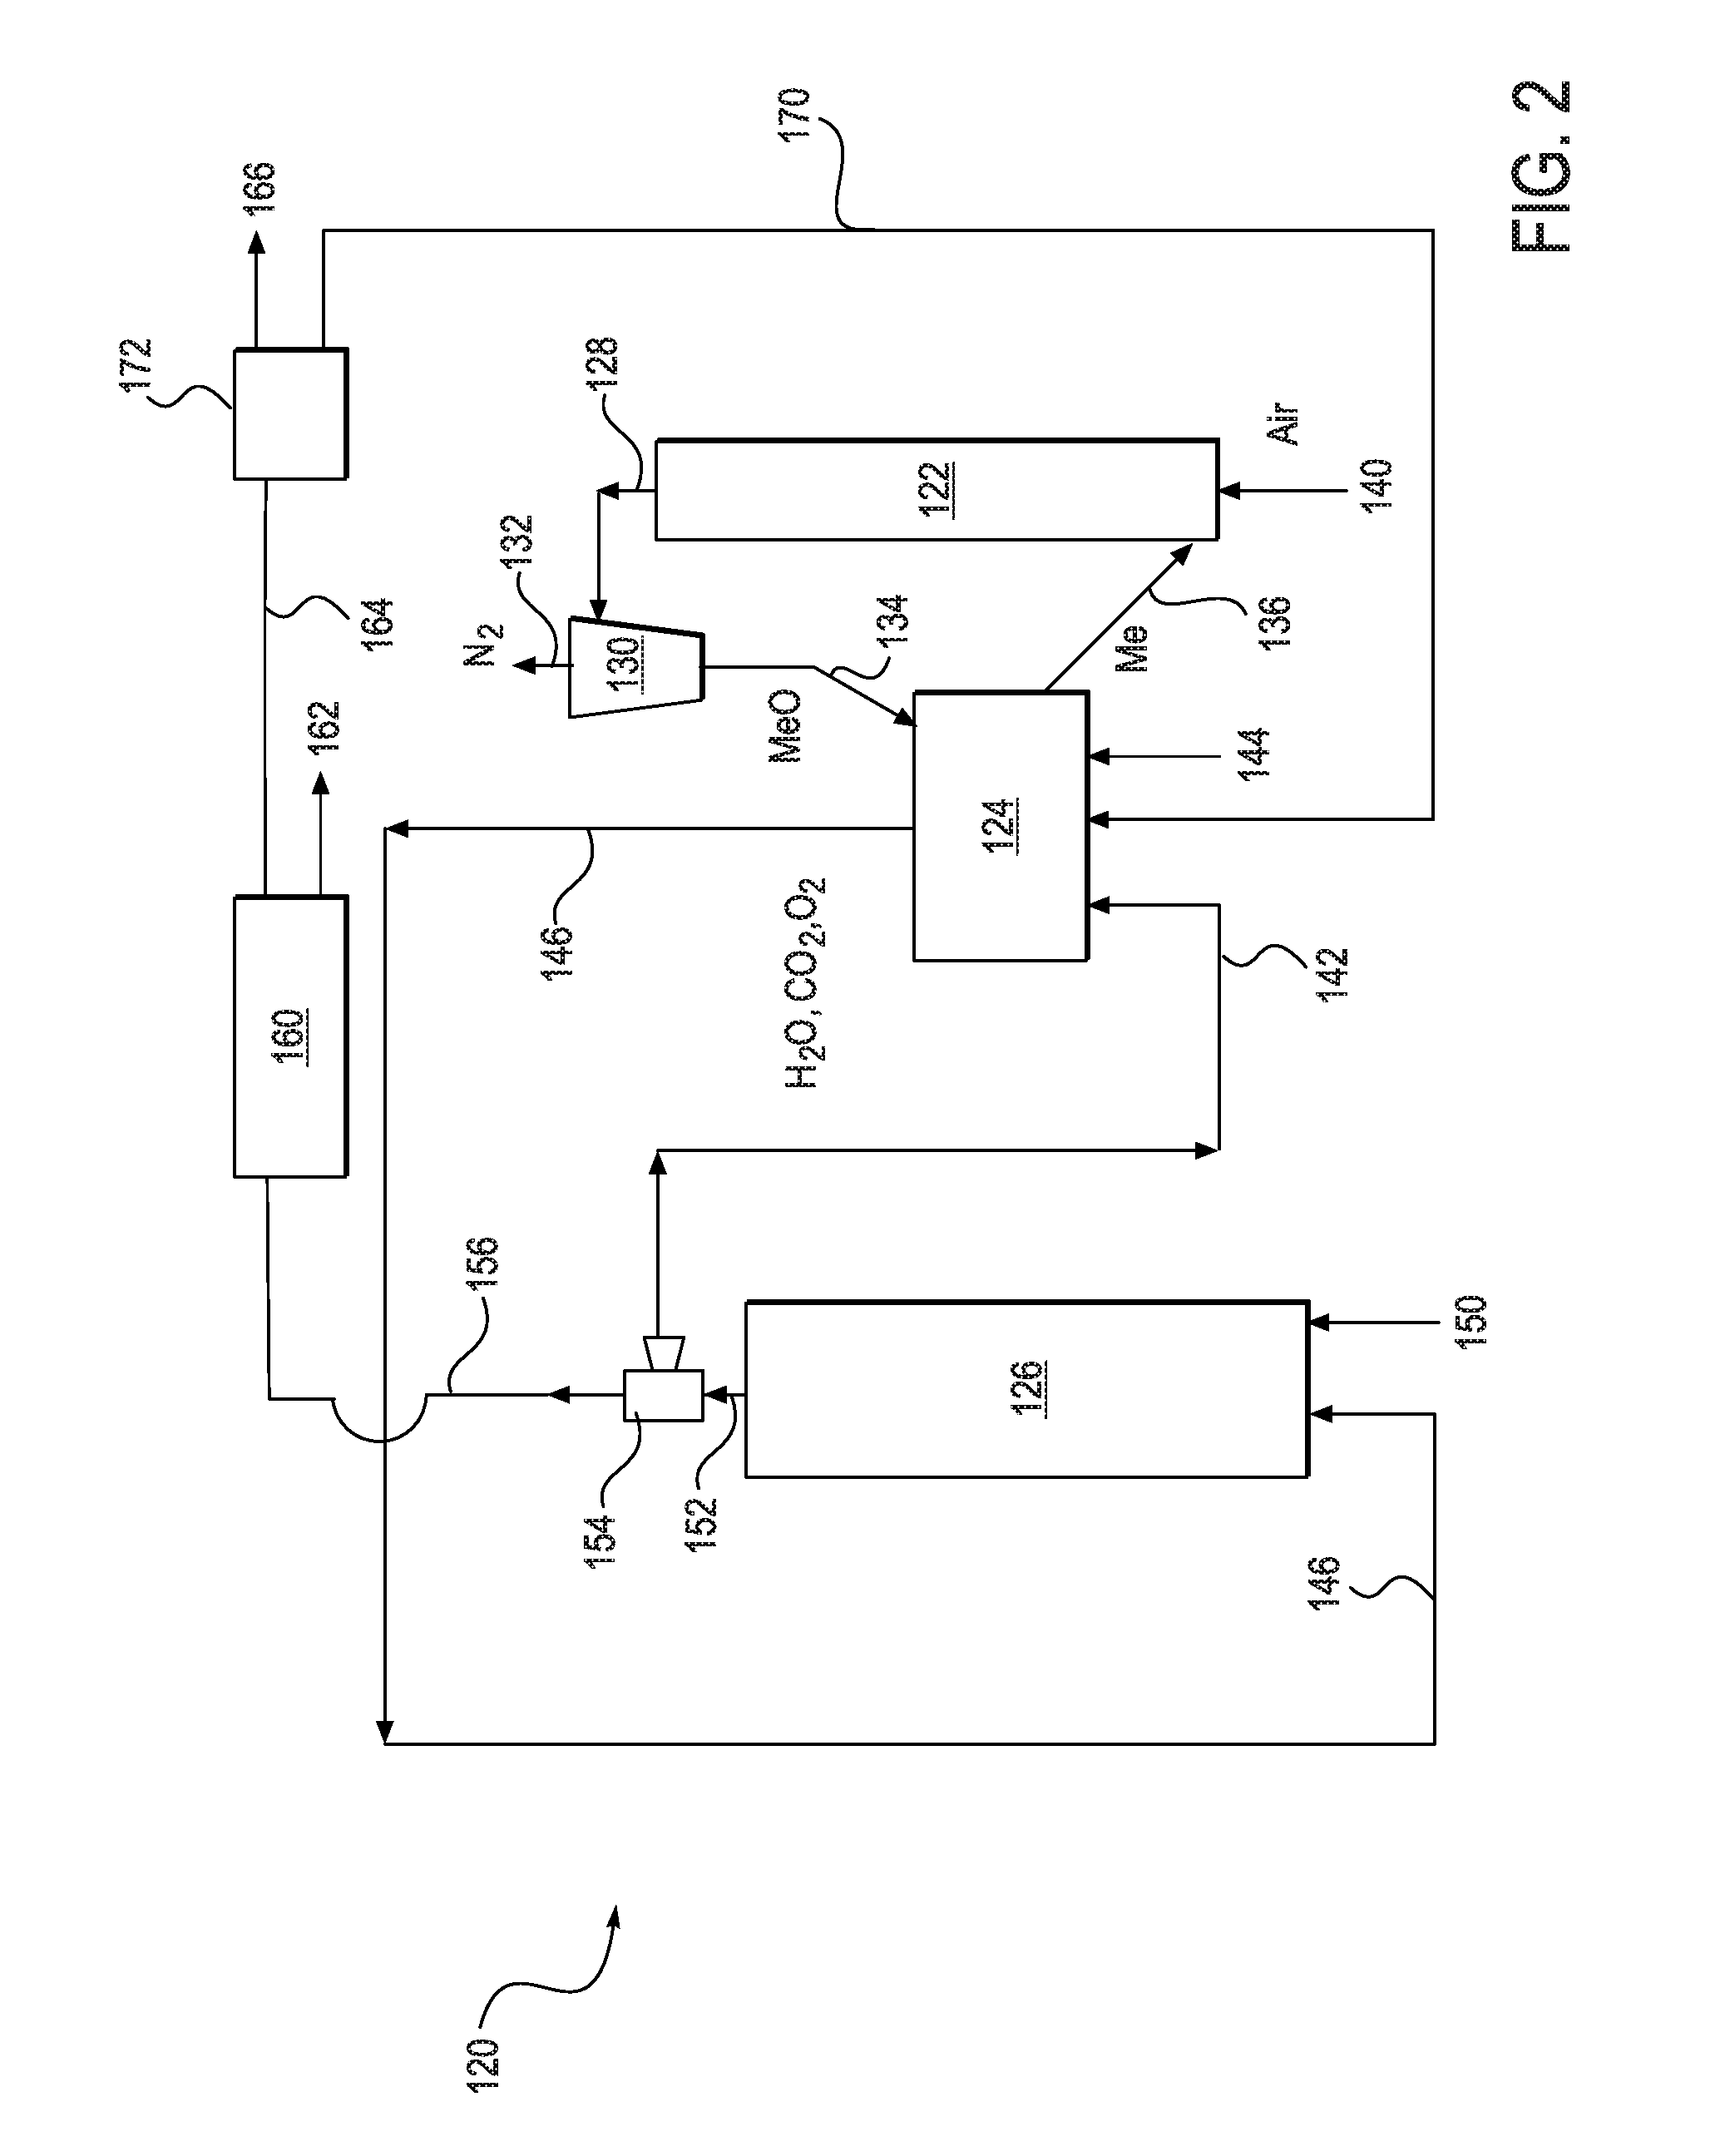 Method and system for capturing carbon dioxide in an oxyfiring process where oxygen is supplied by regenerable metal oxide sorbents